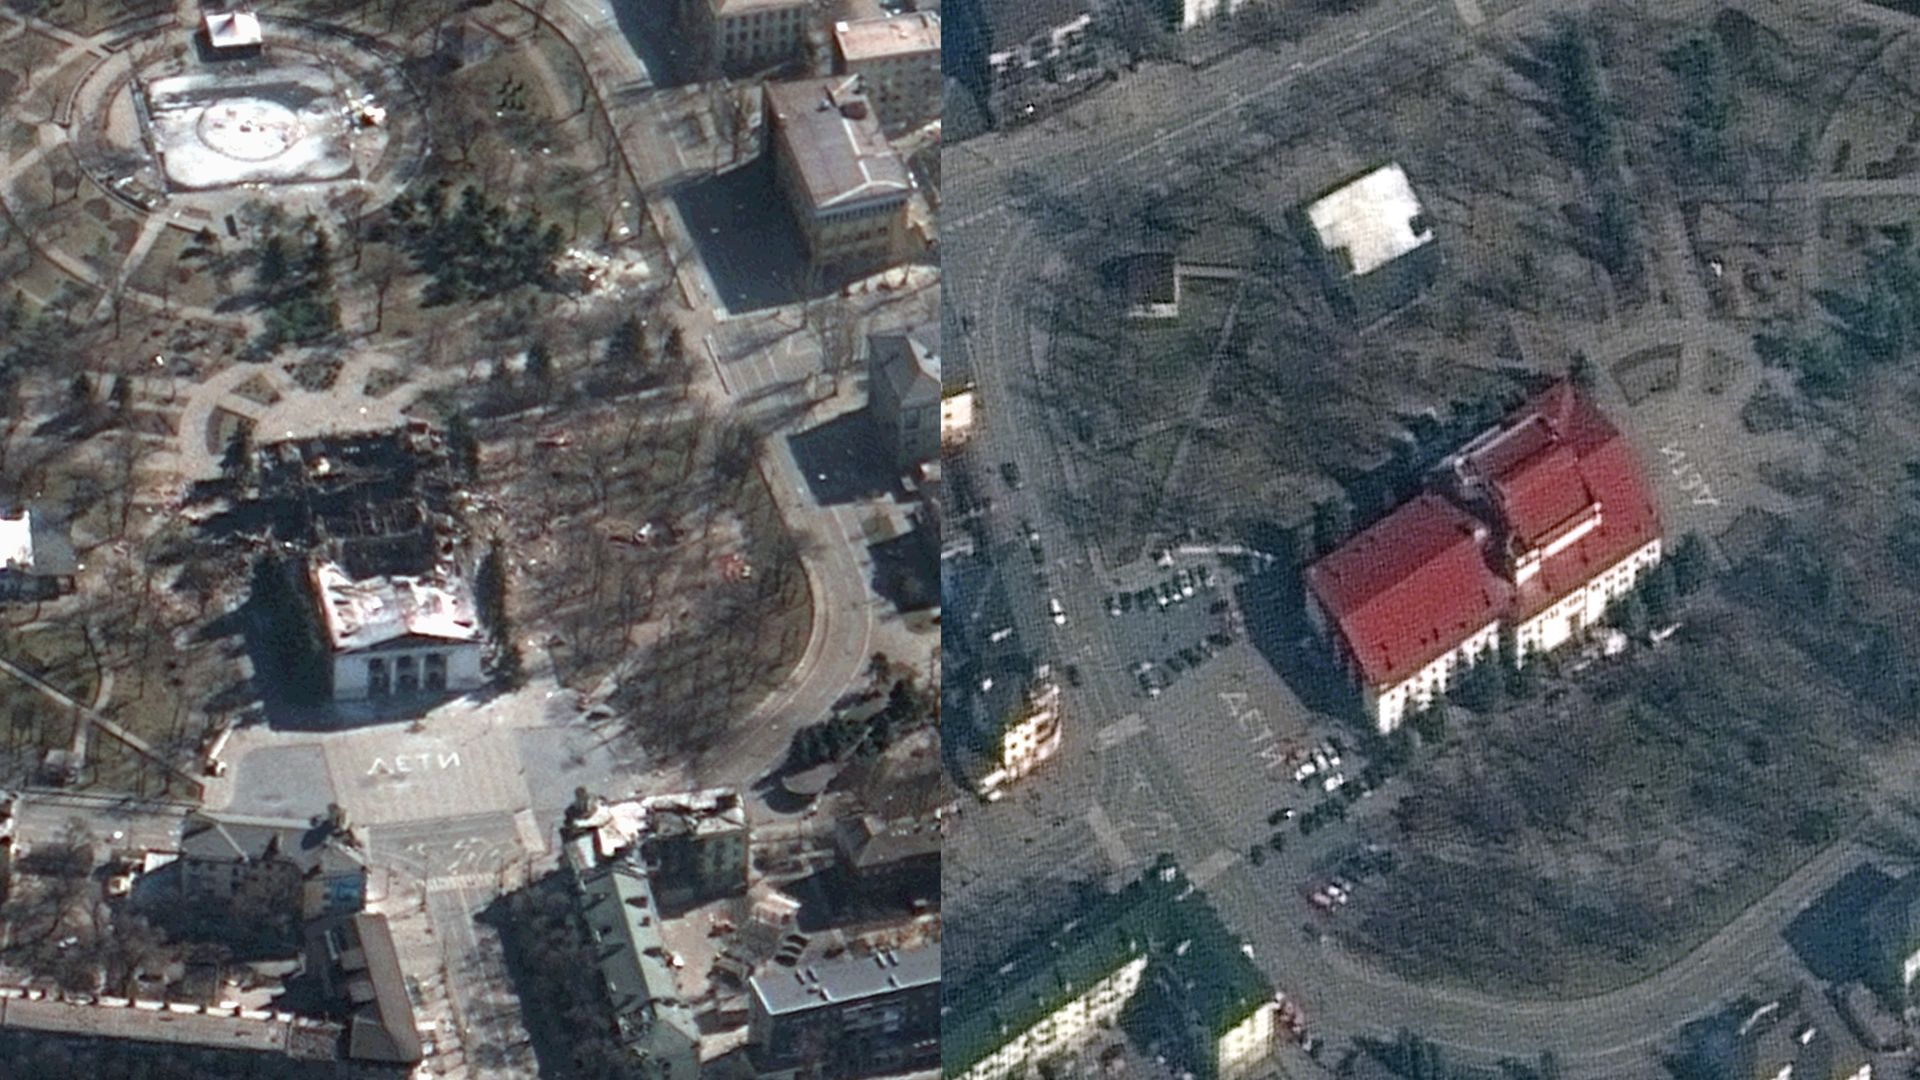 Satellite photos of the Mariupol Drama Theater from March 14 and March 19 before and after it was struck by a Russian airstrike.